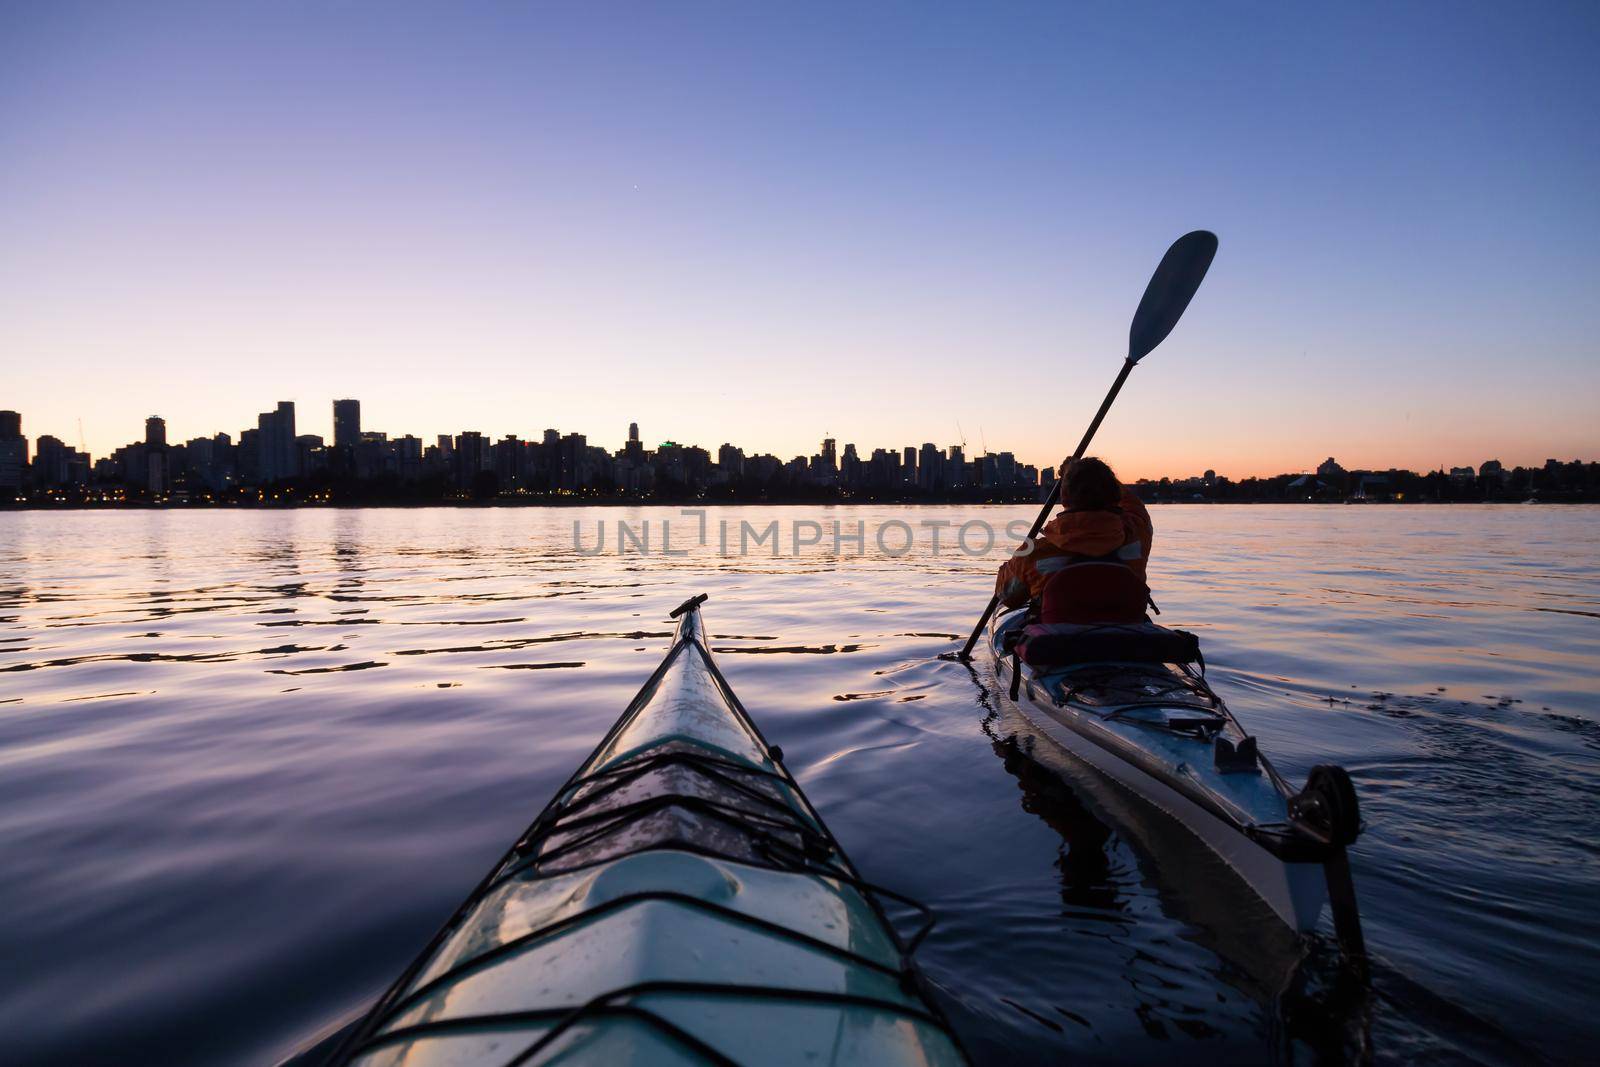 Sea Kayaking in front of Downtown Vancouver by edb3_16